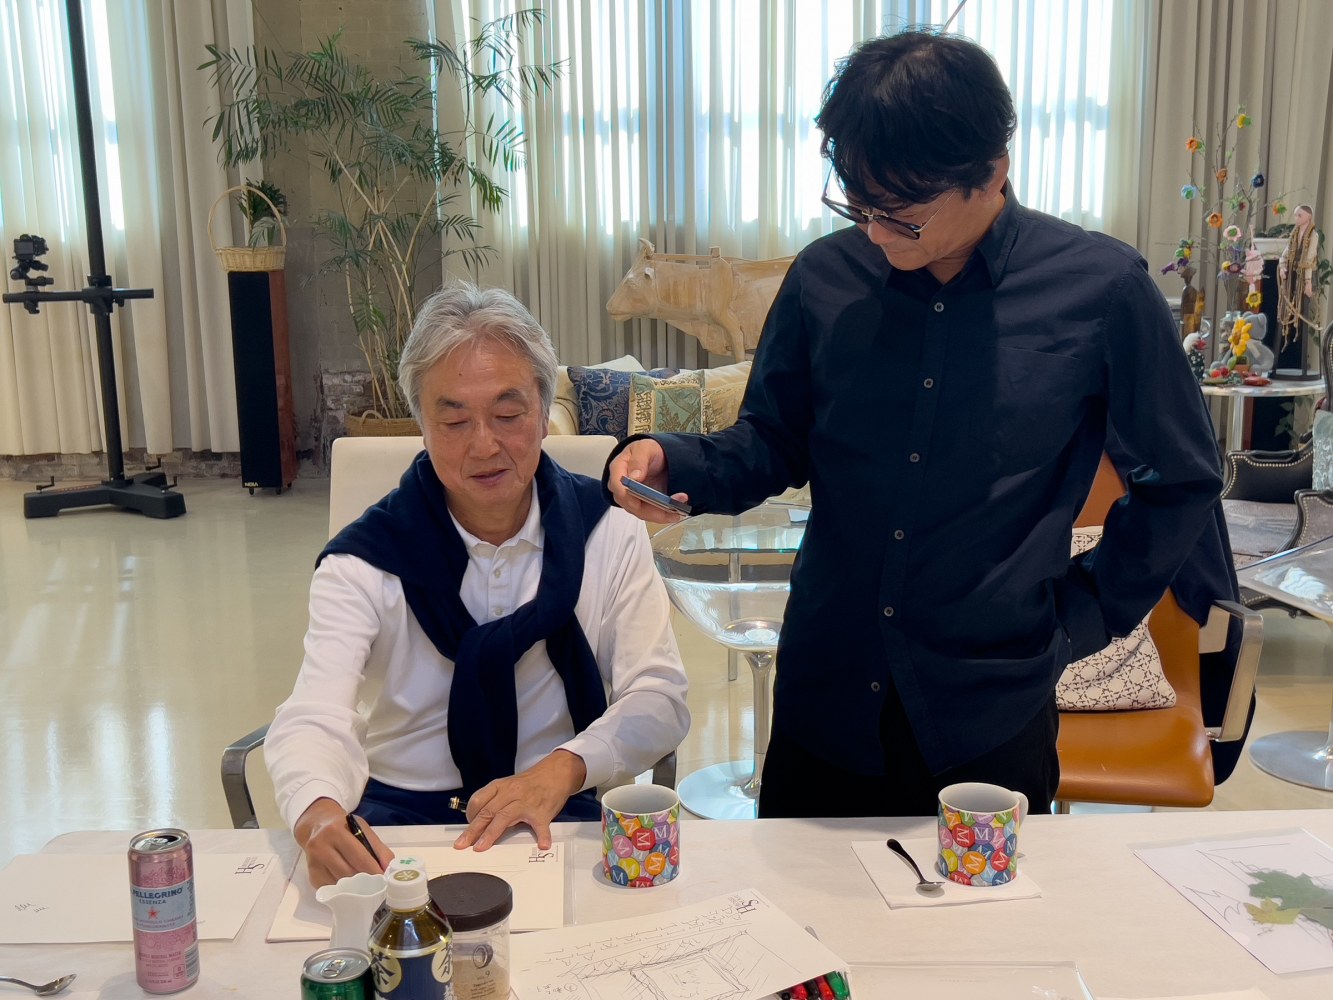 I am in charge of the artwork for opera &amp;quot;Magic Flute&amp;quot; composed by Mozart, which will be performed next February in Japan. &amp;nbsp;Mr. Mucho Muramatsu came to visit my studio to discuss the art, he is in charge of digital image processing of the art. &amp;nbsp;He is an internationally known video artist.